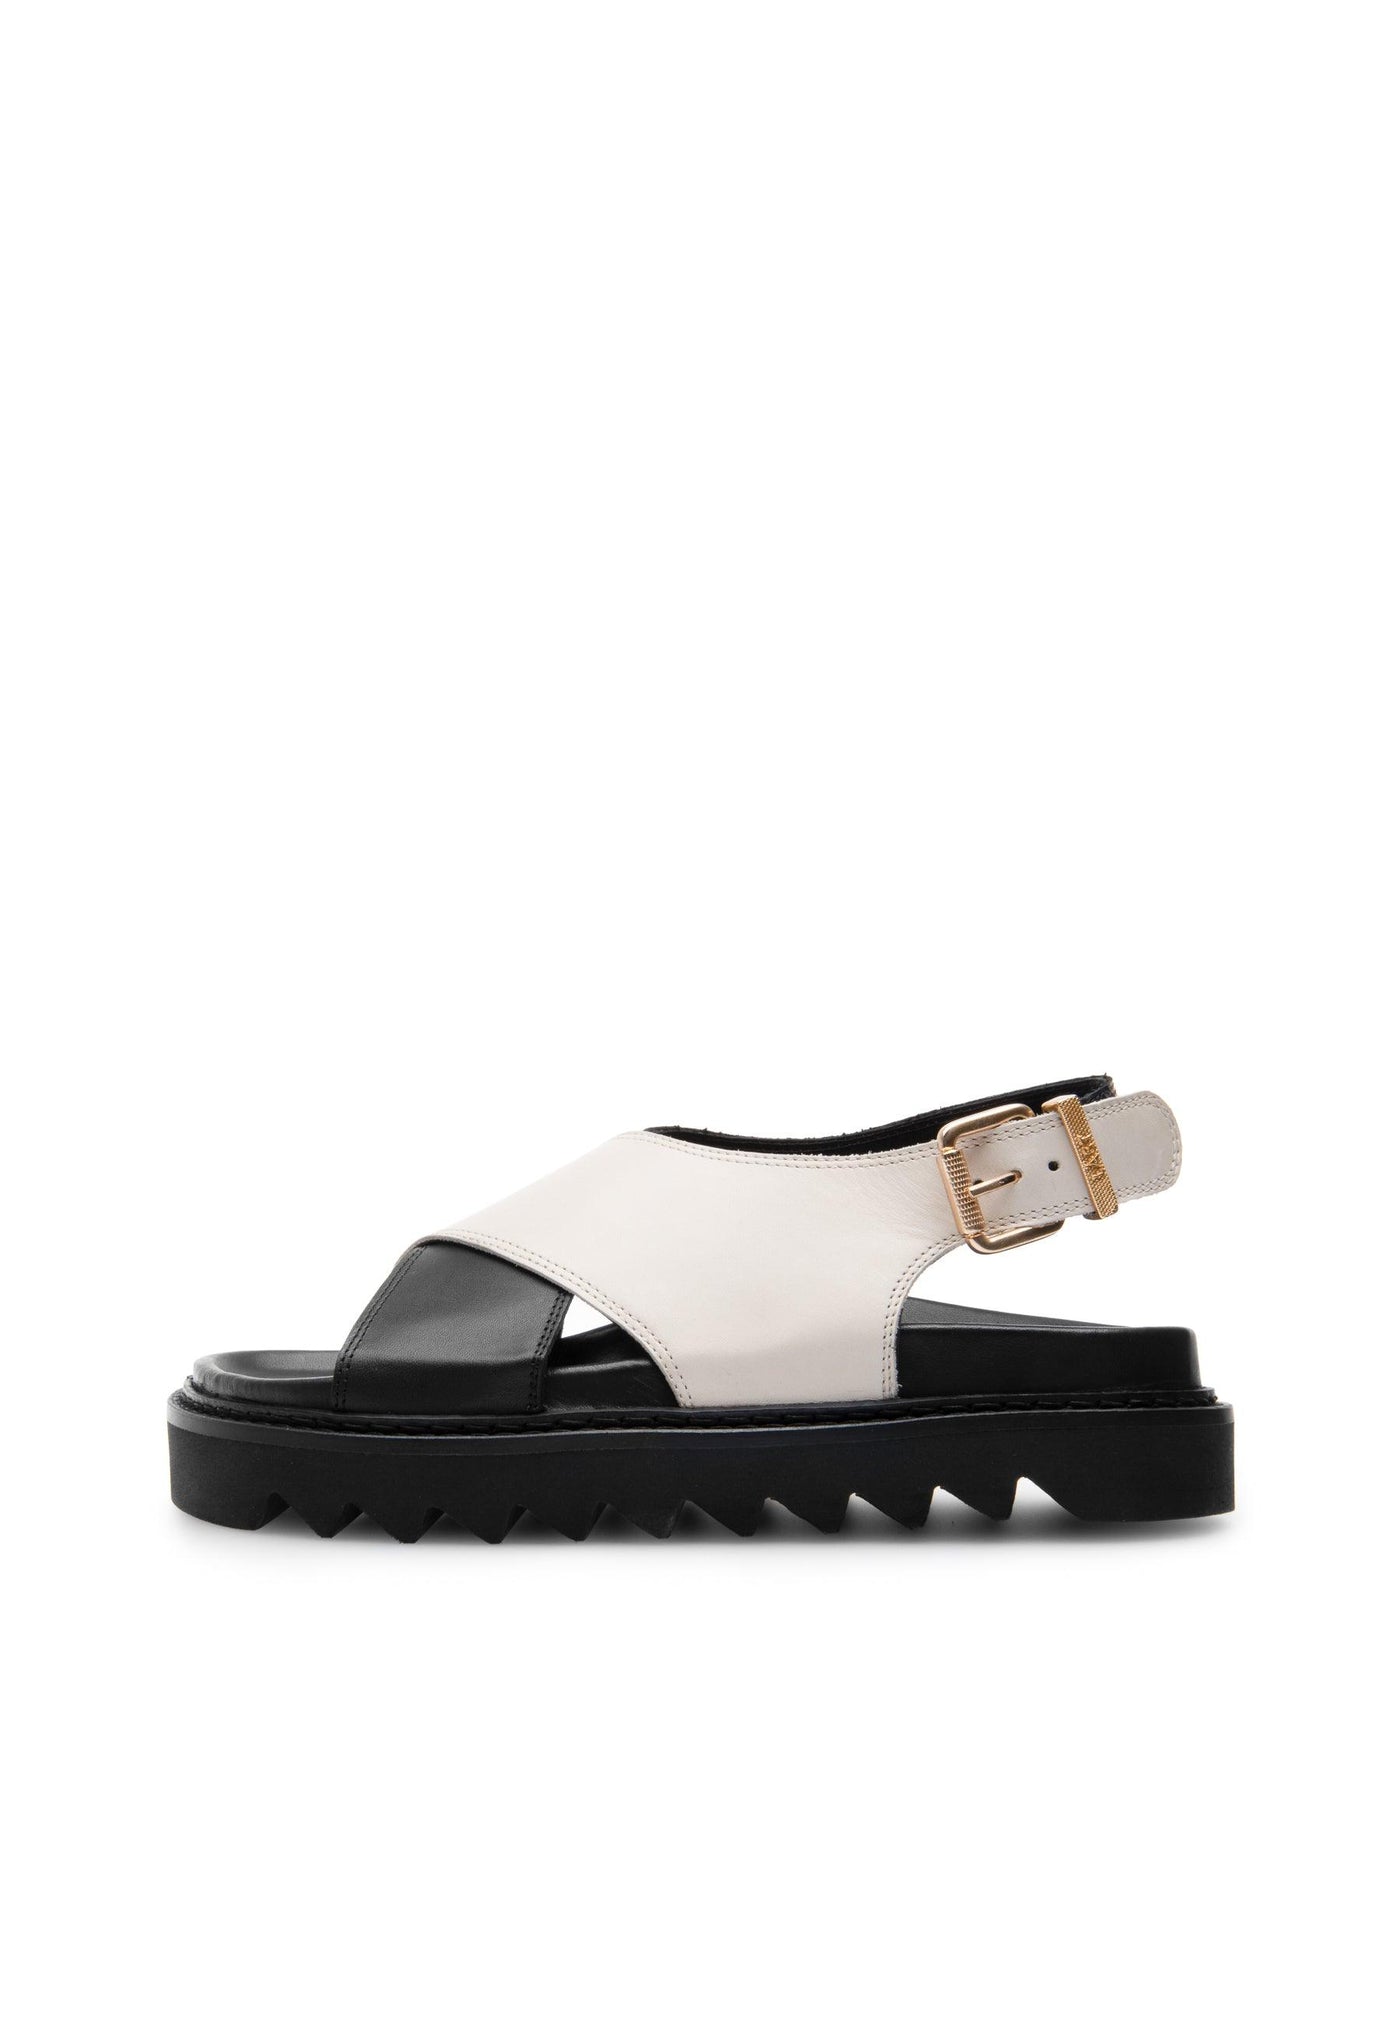 LÄST Diana - Leather - Black/Off White Sandals Black/Offwhite